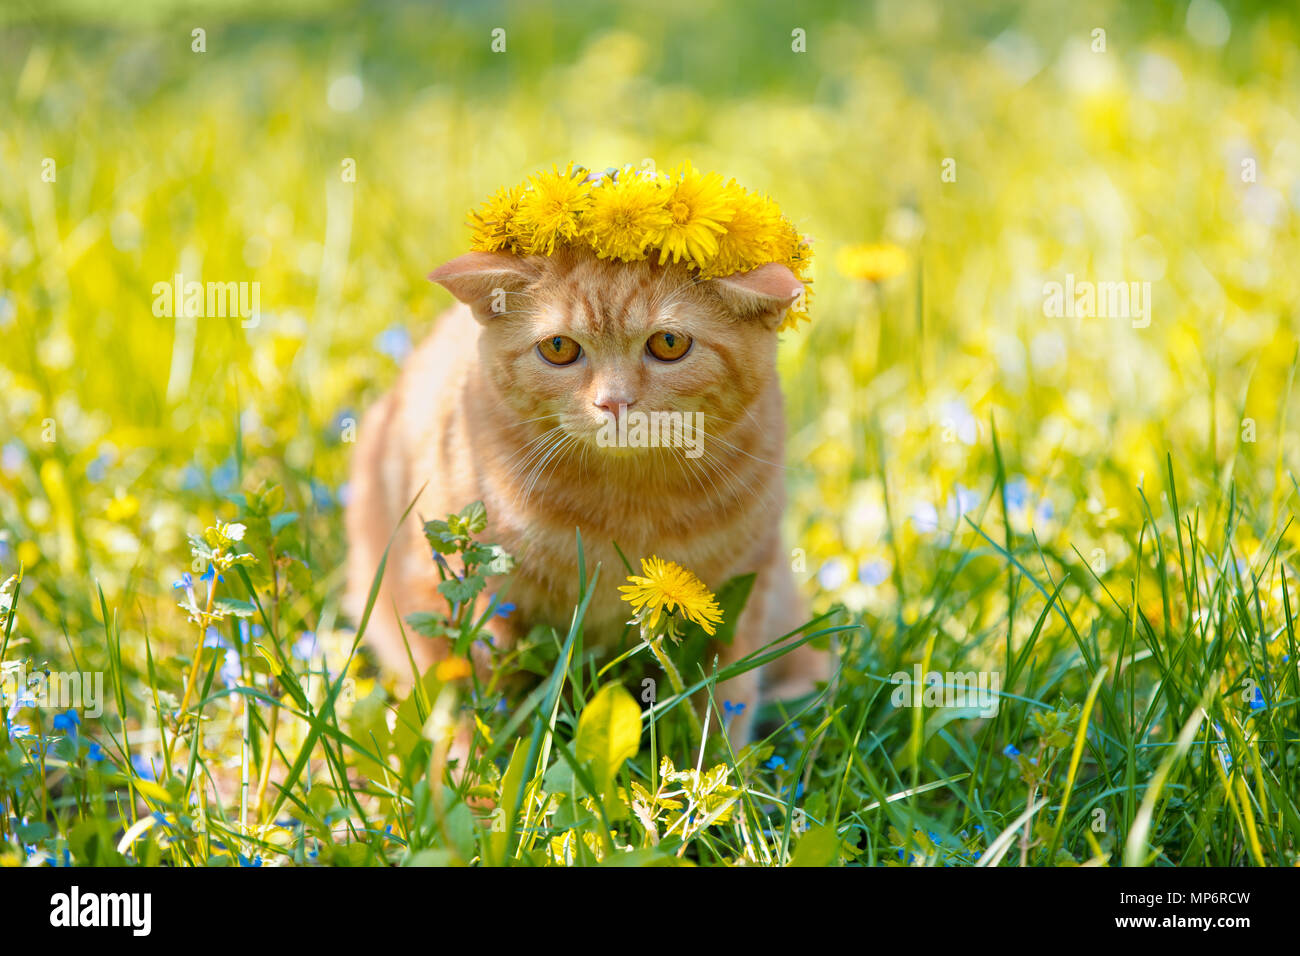 little red kitten crowned chaplet from the dandelion flowers on green lawn Stock Photo